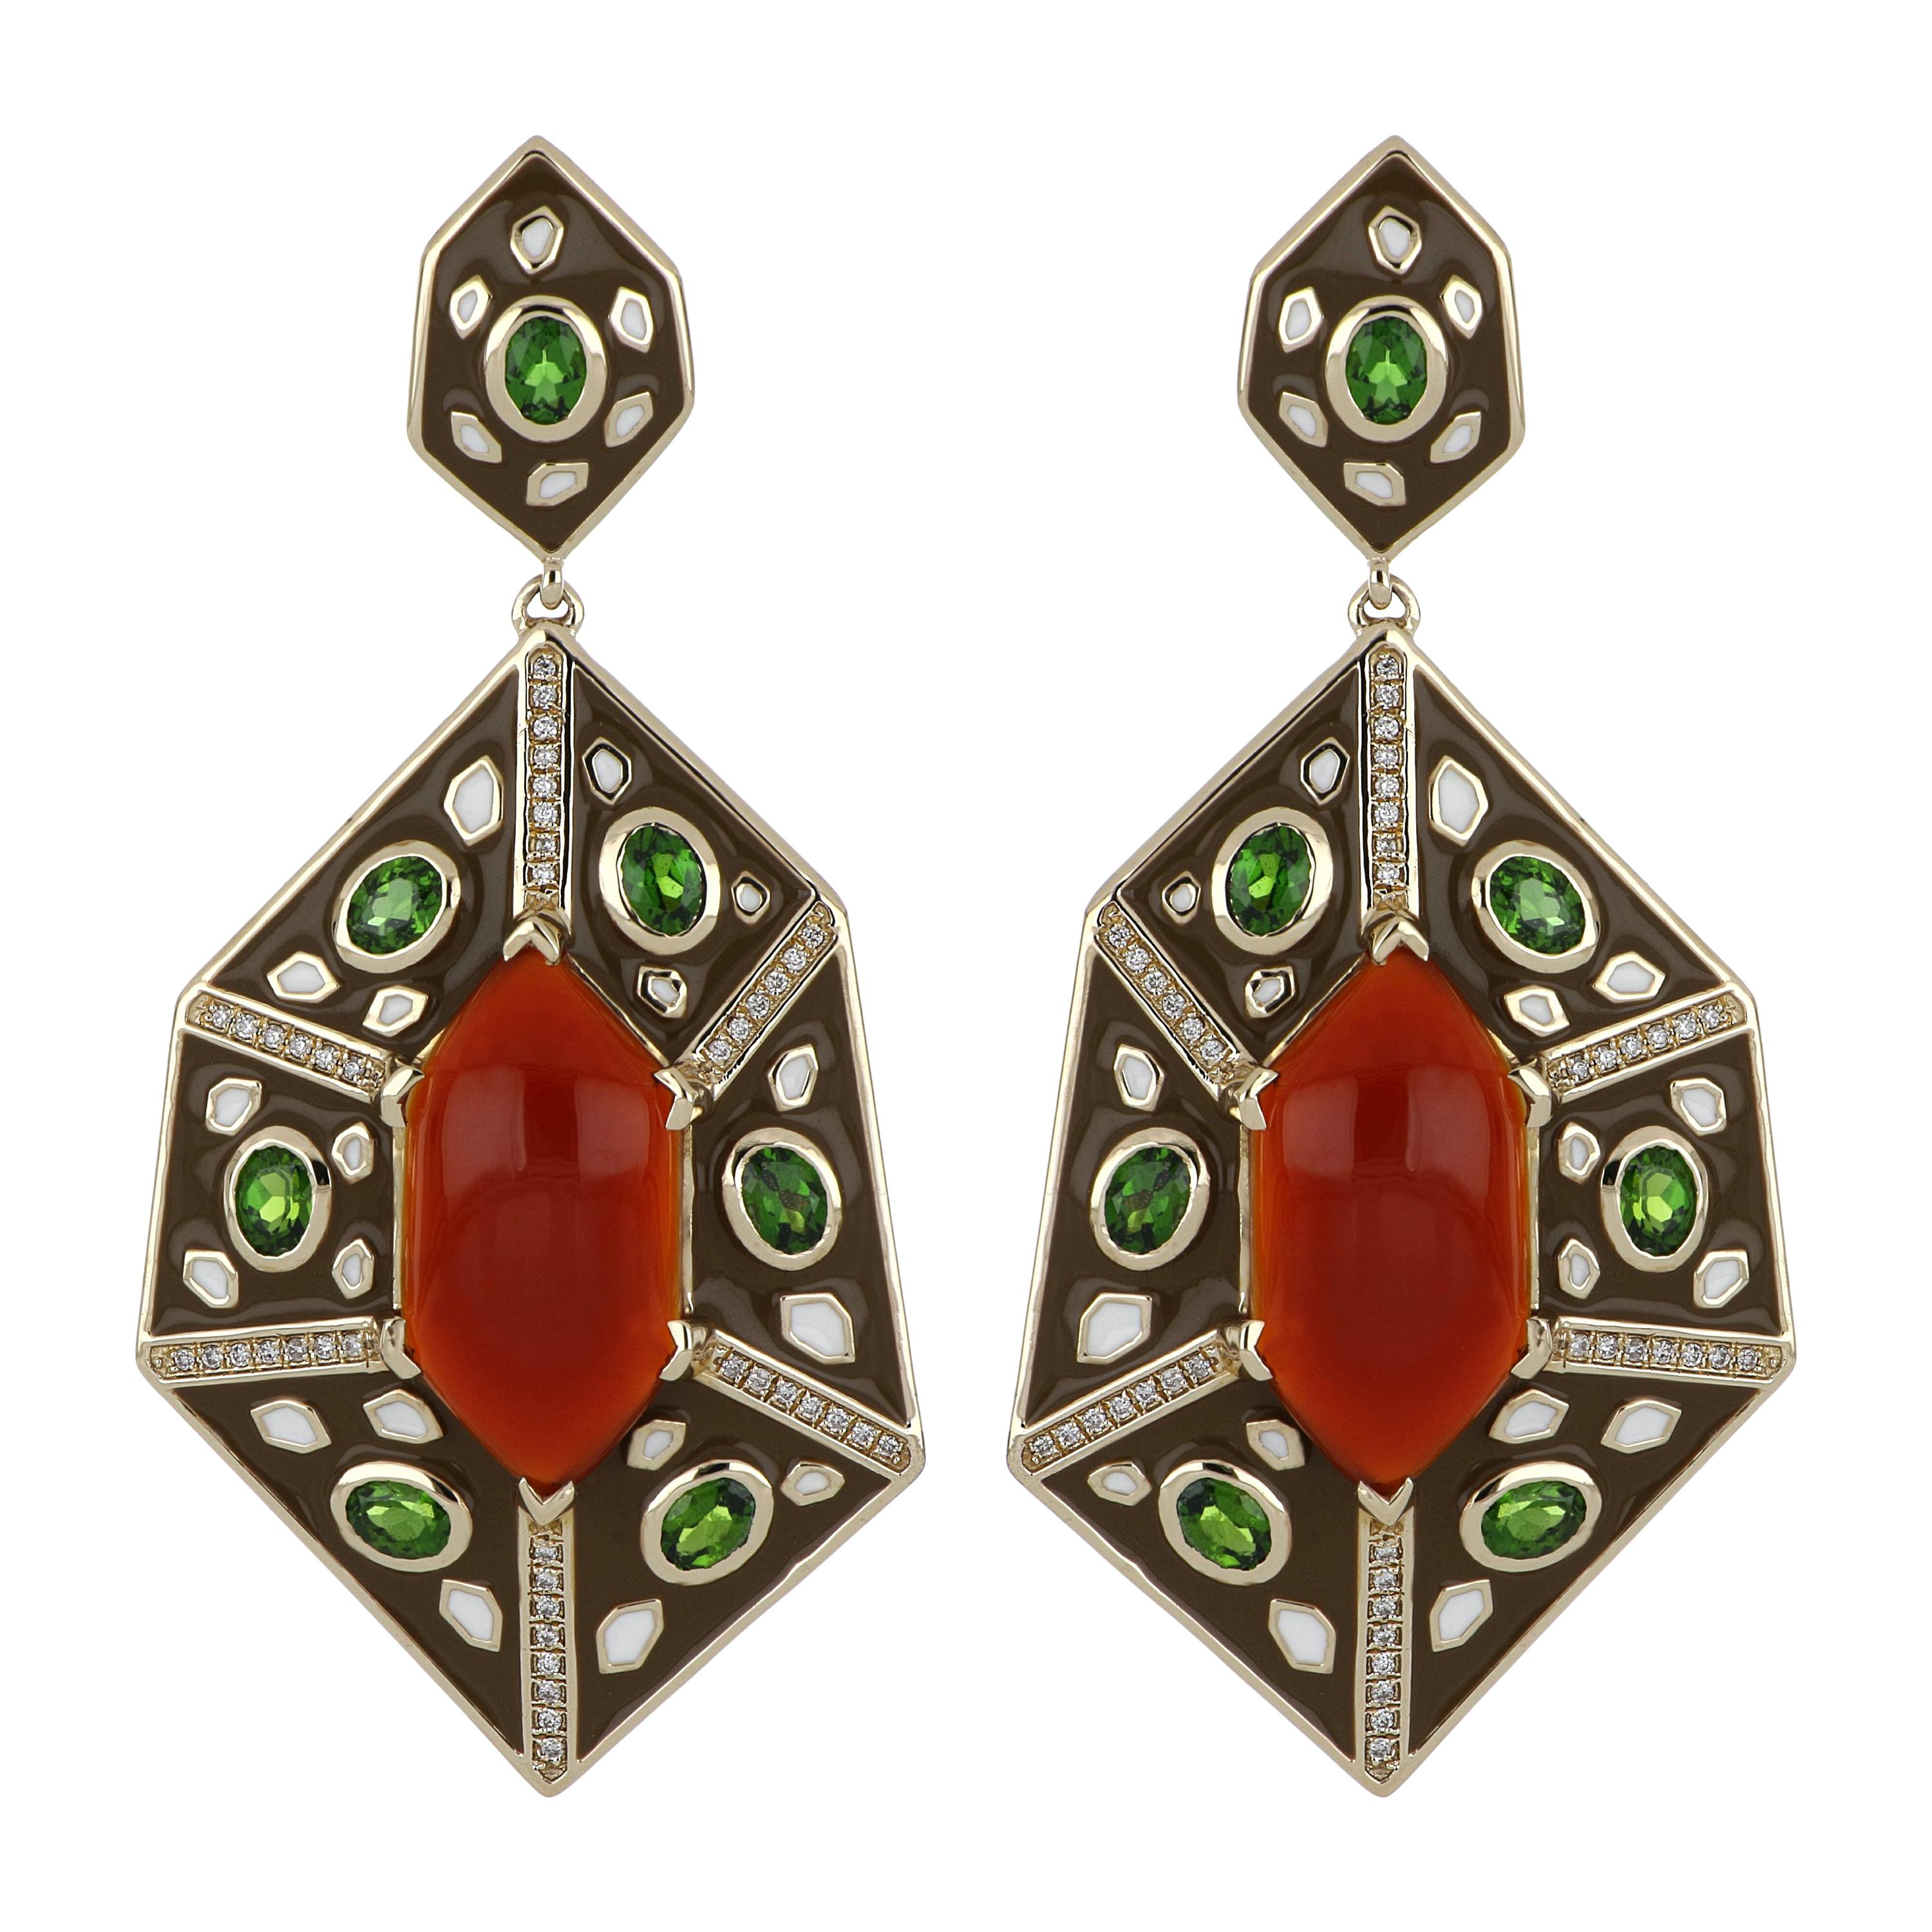 Red Onyx and Chrome Diopside Studded Color Enamel Earrings in 14 Karat Gold